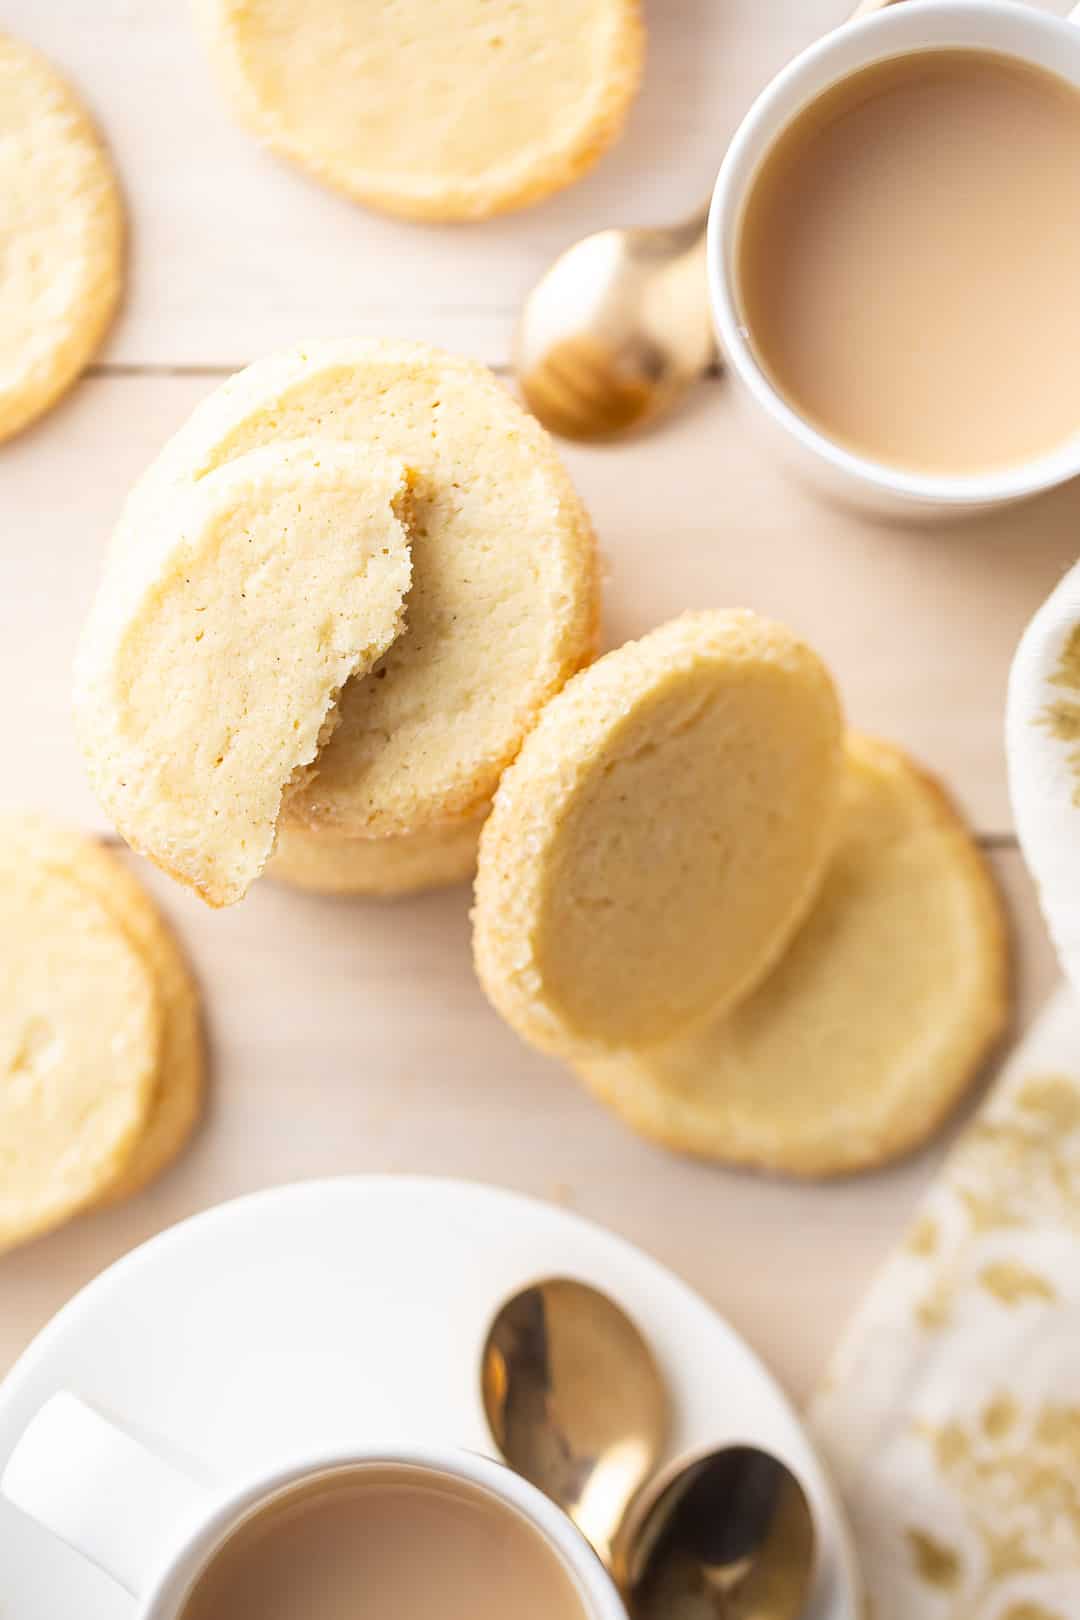 Butter cookies recipe, prepared and scattered over a blond wood tabletop, with cups of milky tea.